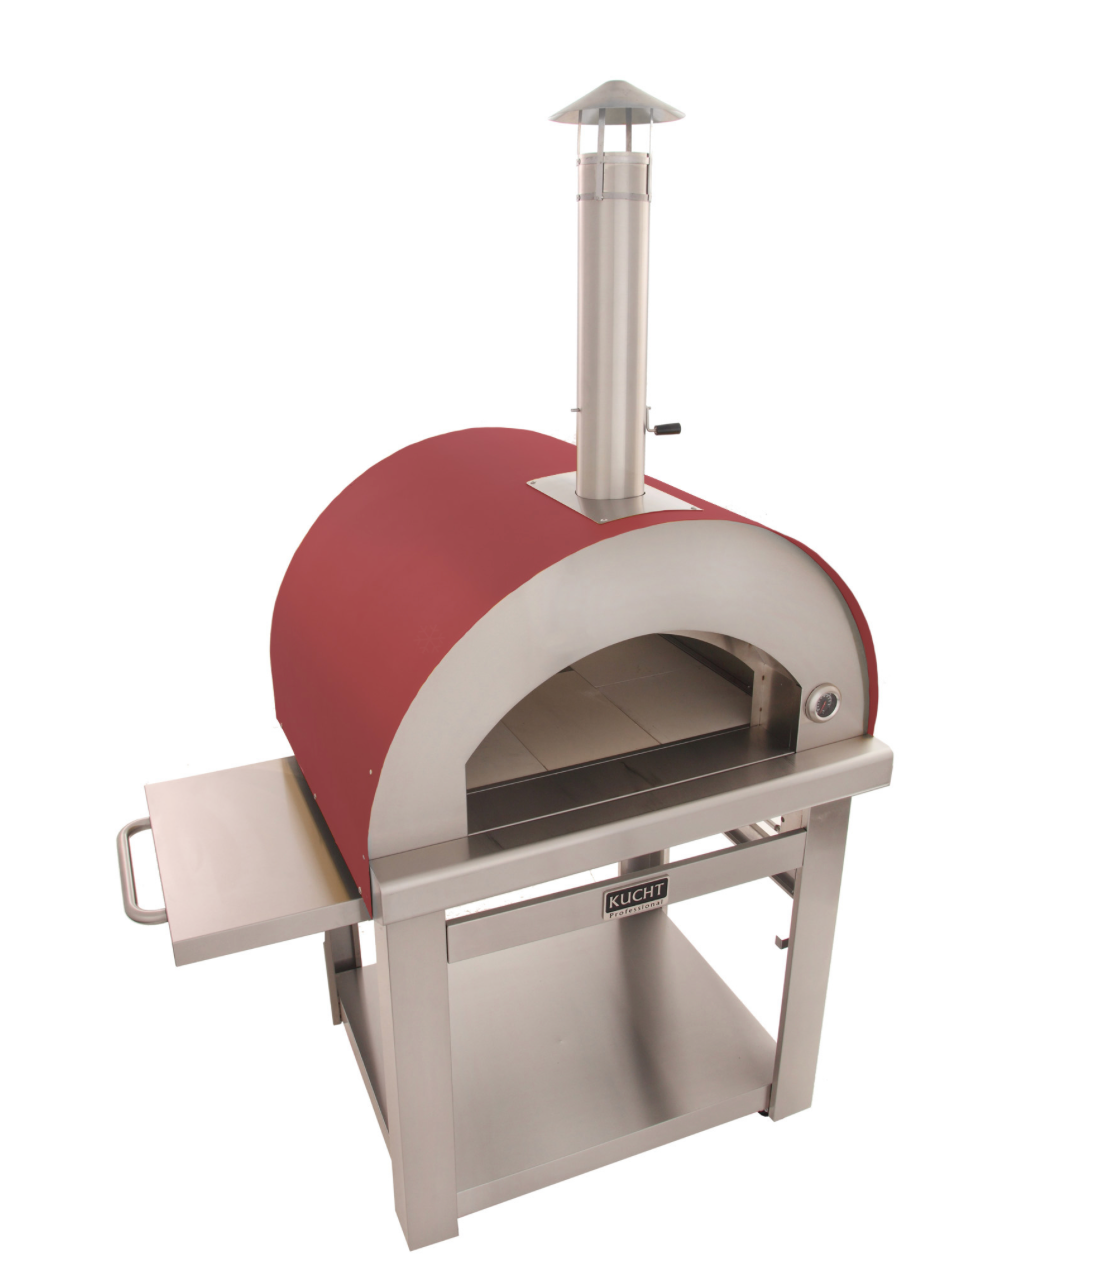 Kucht Professional Venice Wood Fired Pizza Oven